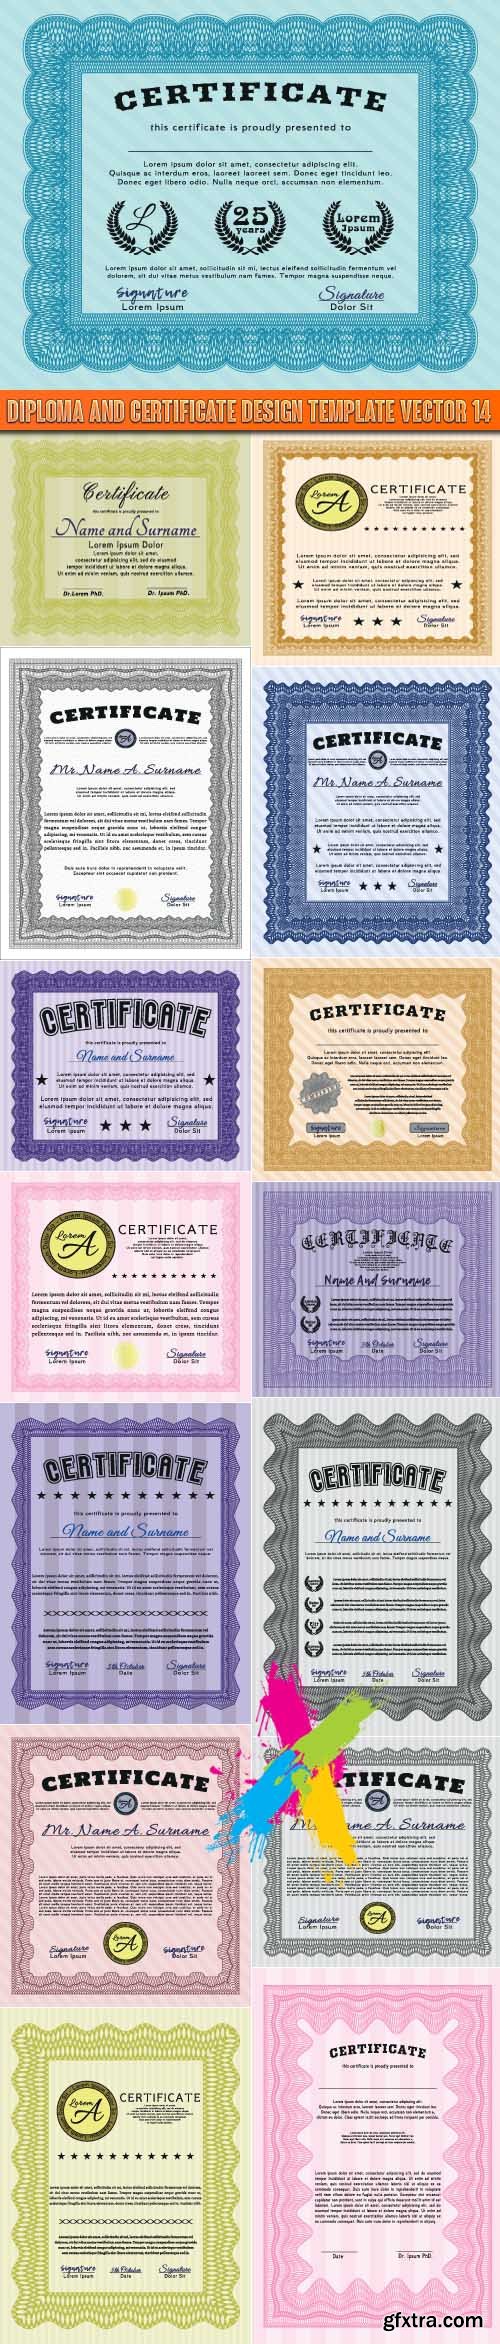 Diploma and certificate design template vector 14